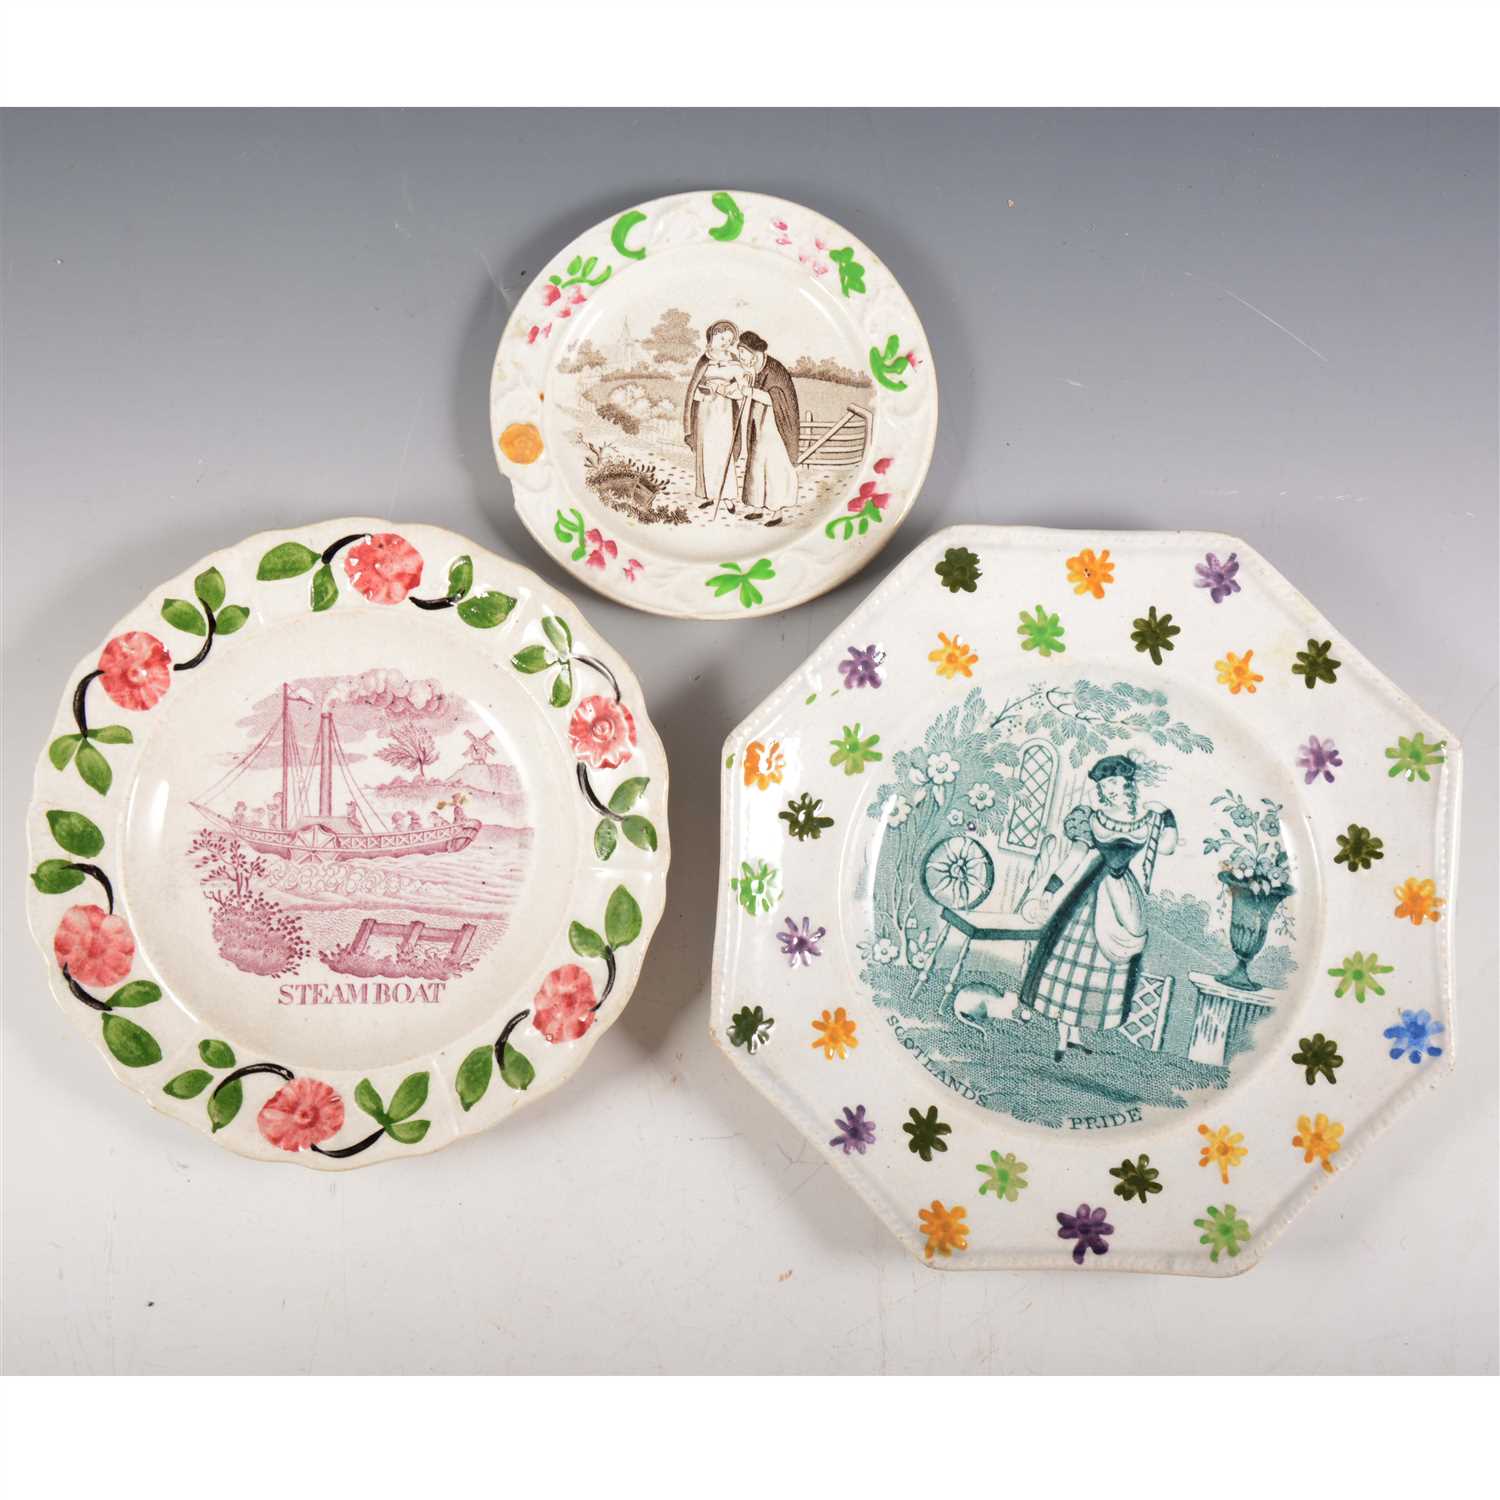 Lot 18 - A Staffordshire nursery plate, Steamboat, Goodwins & Harris, 1830's; and two other plates